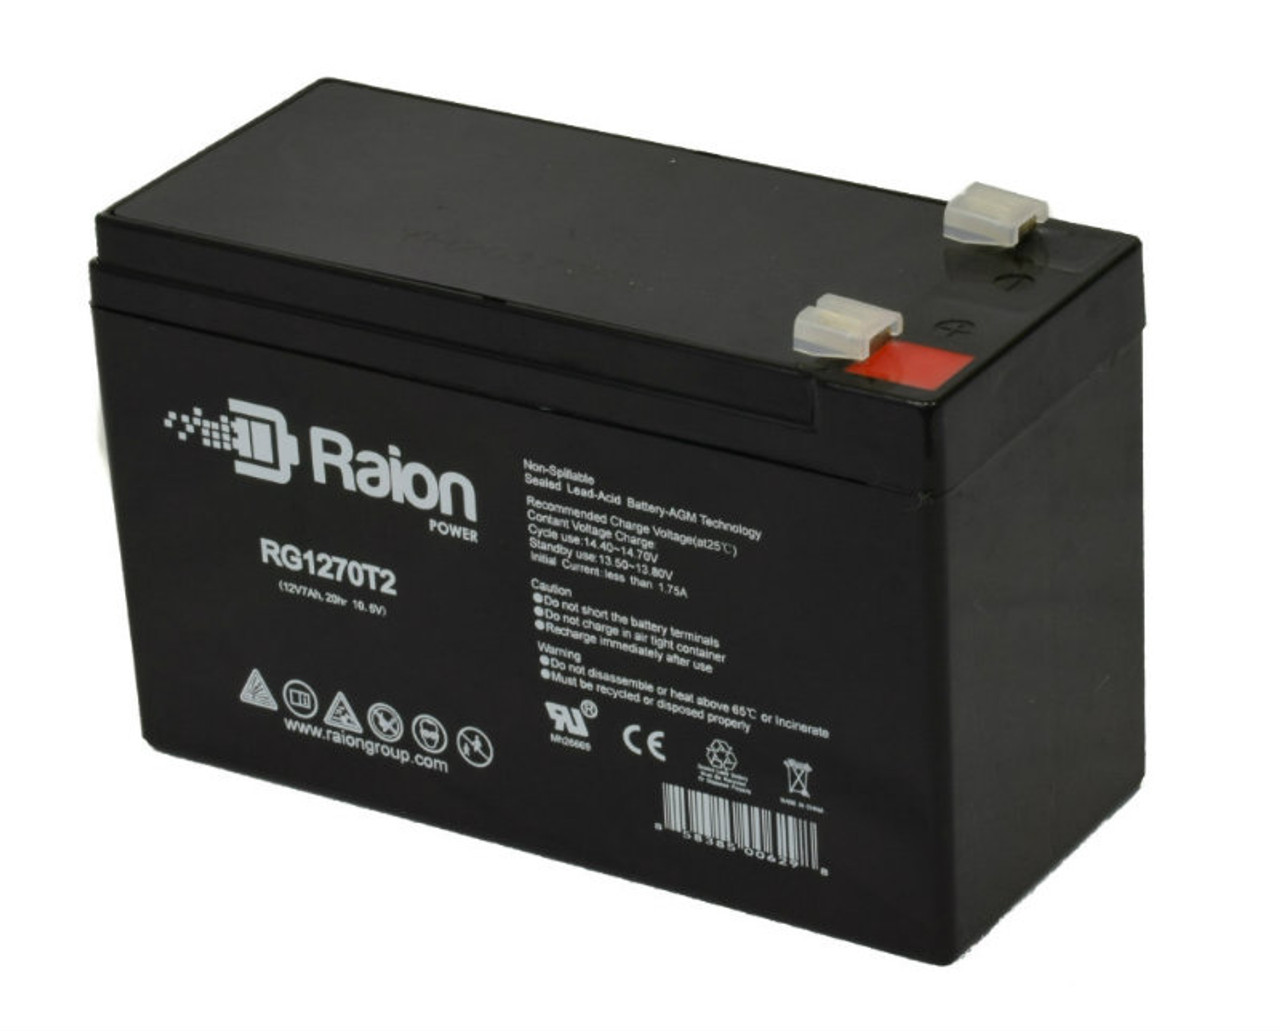 Raion Power RG1270T1 12V 7Ah Non-Spillable Replacement Battery for Leoch DJW12-7L